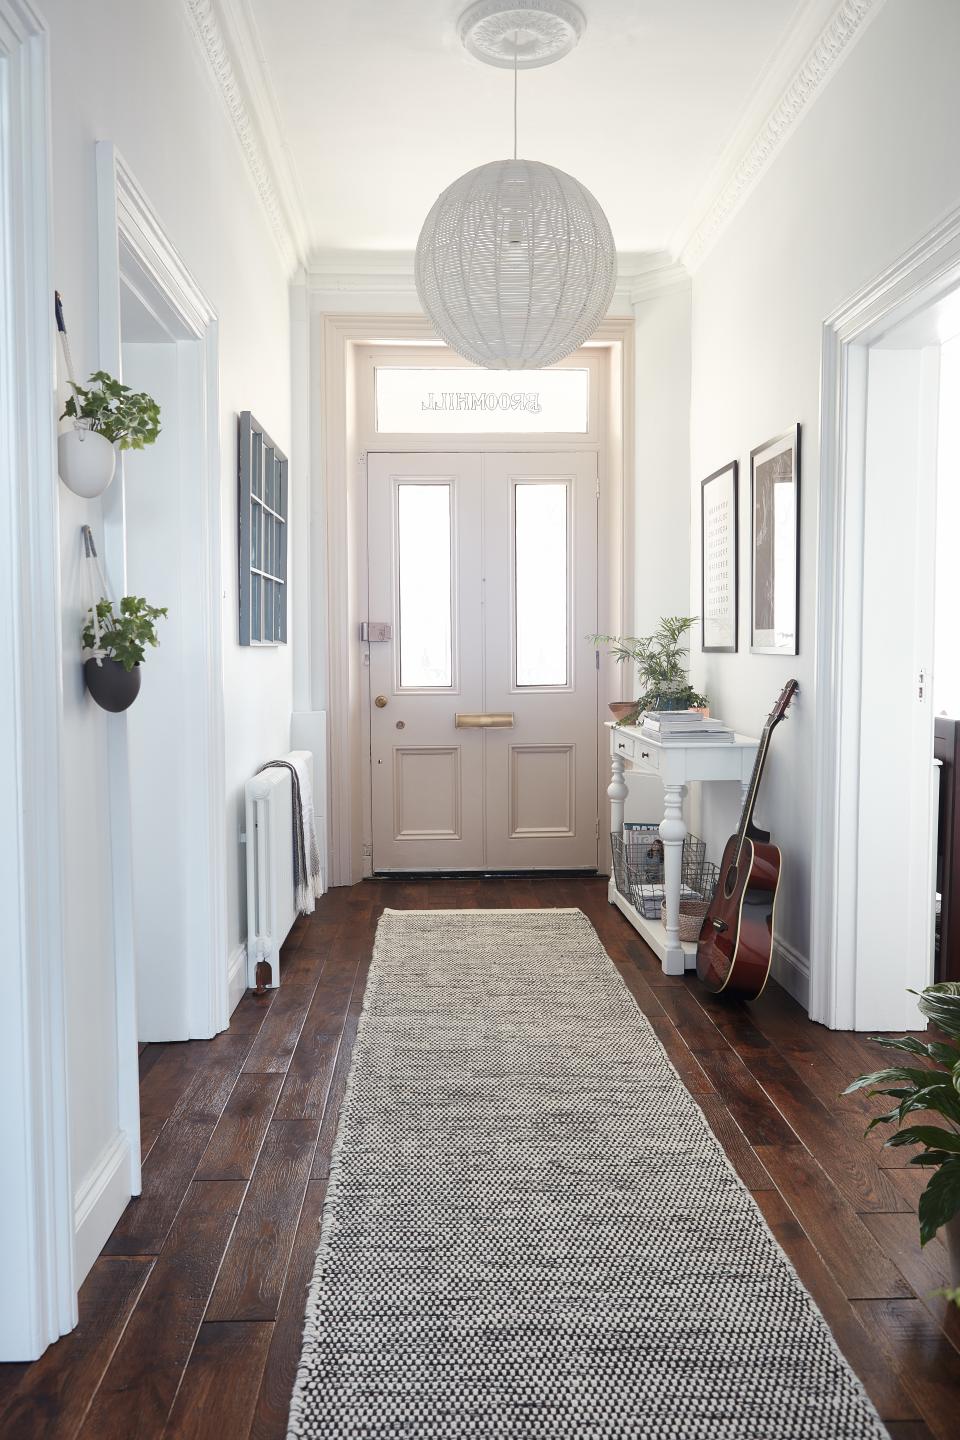 <p> Creating the illusion of a bright, airy space is best achieved by opting for a neutral color scheme, especially if you are designing a small hallway. </p> <p> Maximize natural light with white walls, a large mirror design, and furniture that (almost) blends into the rest of the scheme if you like the idea of a spacious, minimalist-inspired hallway design. </p>